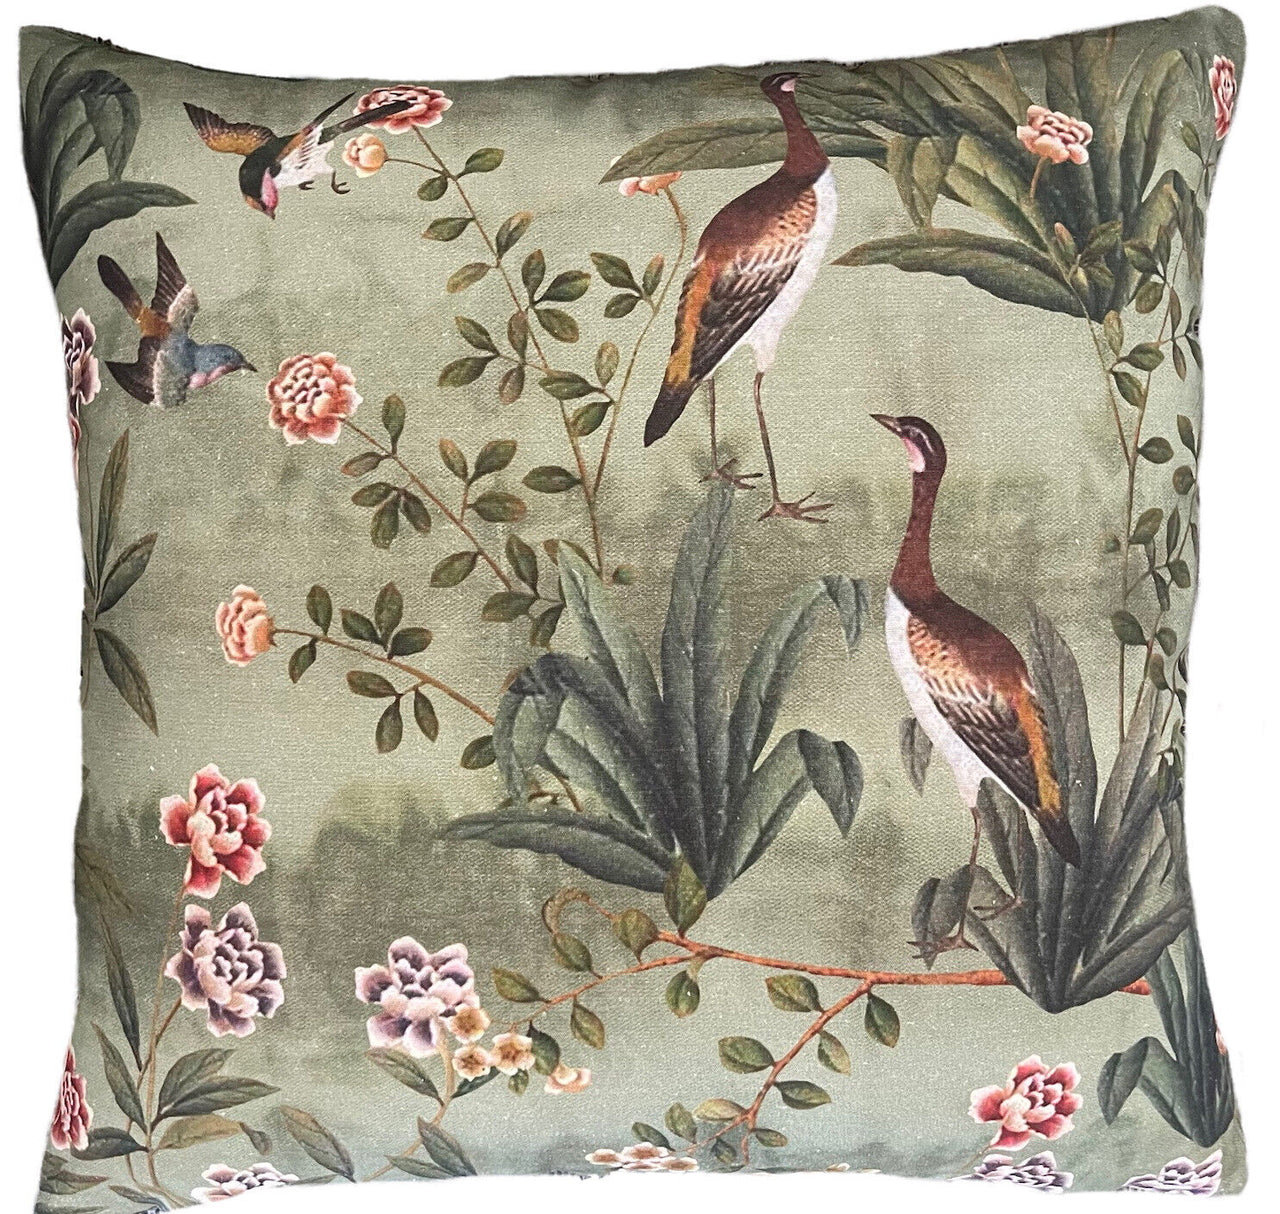 Vintage Style Cushion Cover 22” Geese, Birds Decorative throw Pillow Case Plants, Flowers Pillowcase Green Sofa Home Decore